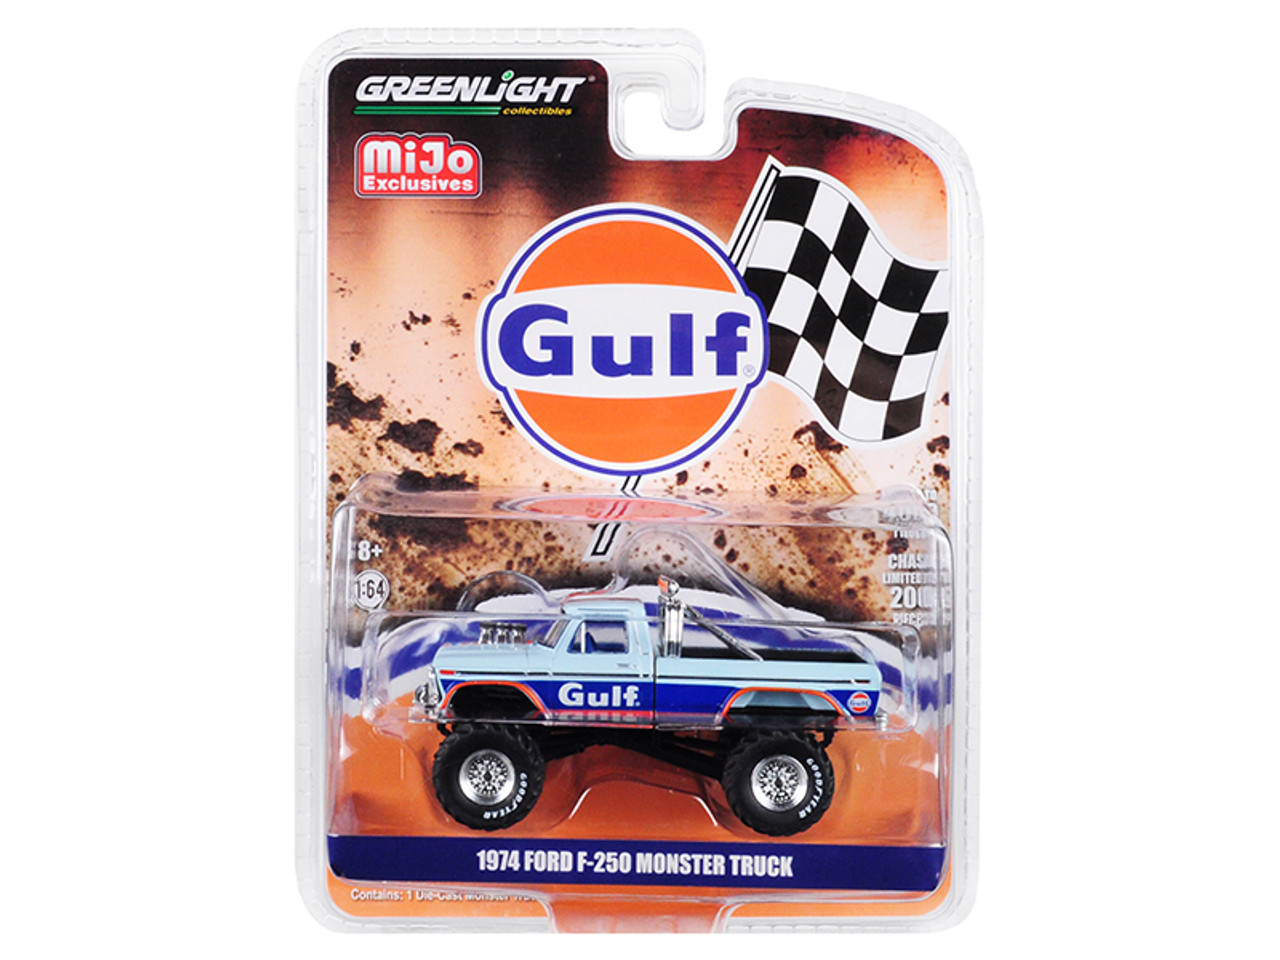 1974 Ford F-250 Monster Truck "Gulf" Blue with Orange Stripes Limited Edition to 4,600 pieces Worldwide 1/64 Diecast Model Car by Greenlight